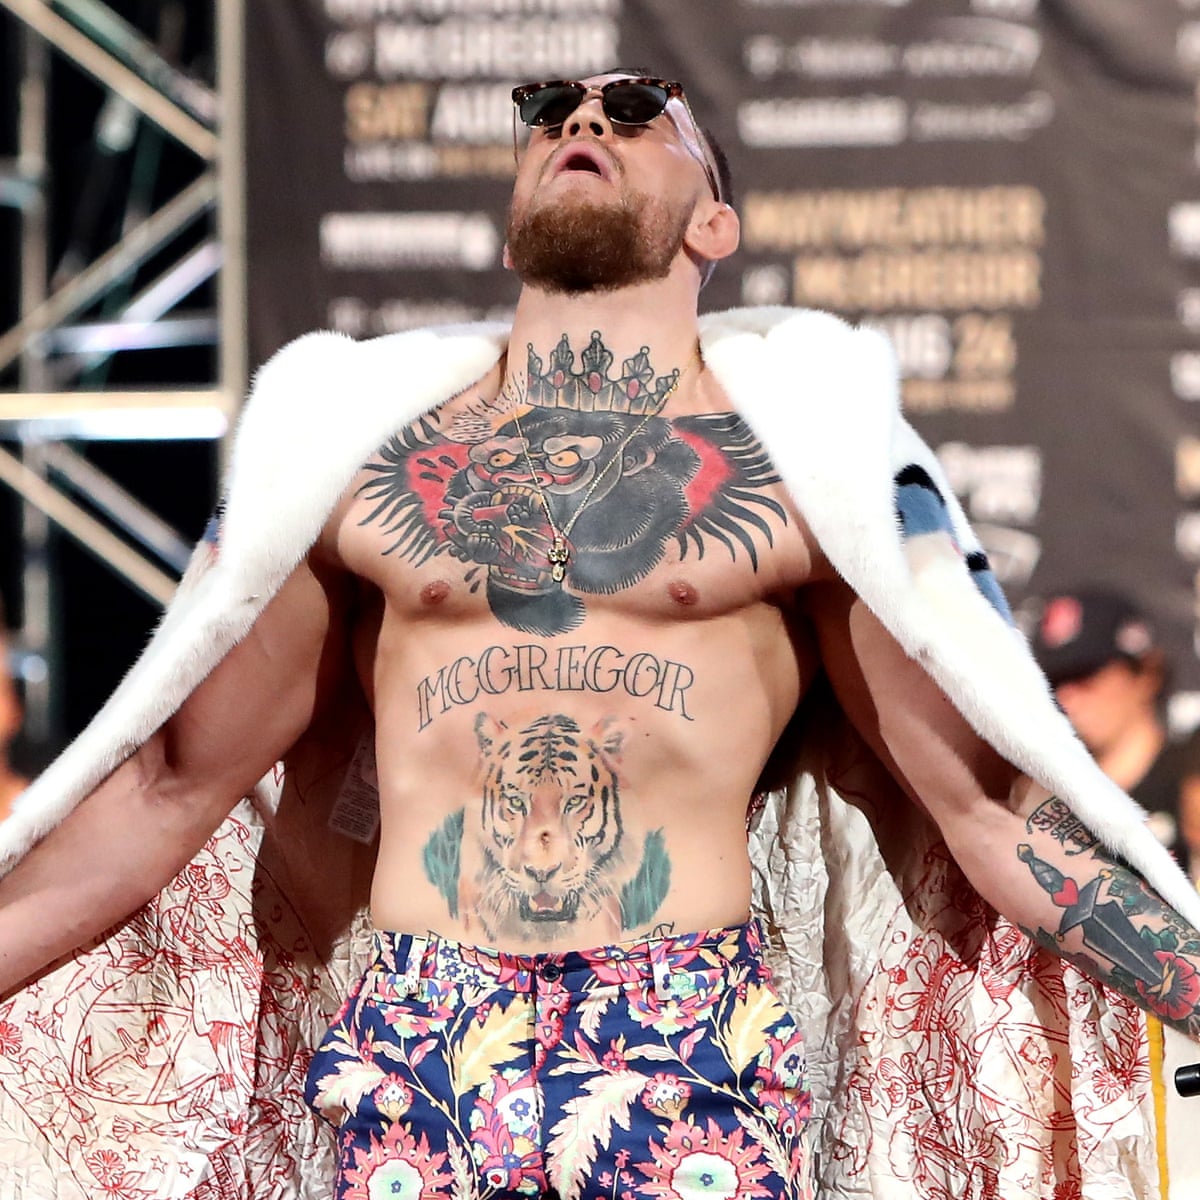 Floyd Mayweather v Conor McGregor 'Money Fight' poised to generate